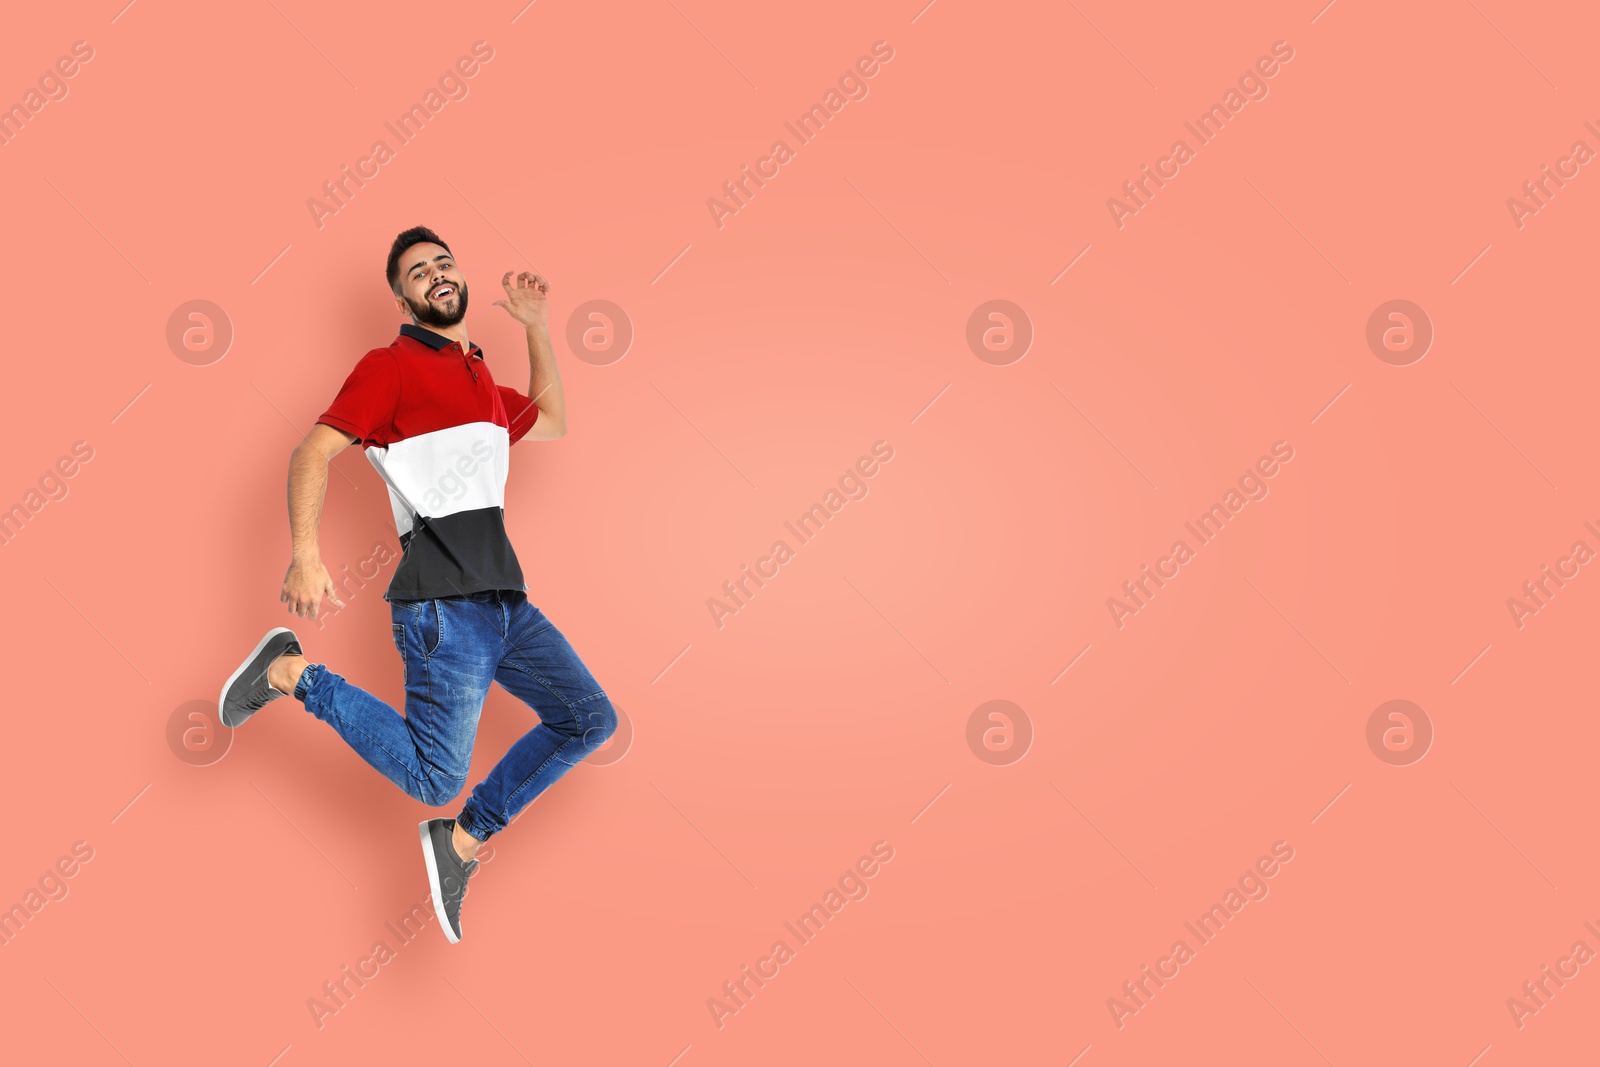 Image of Positive young man jumping on pink background. Space for text